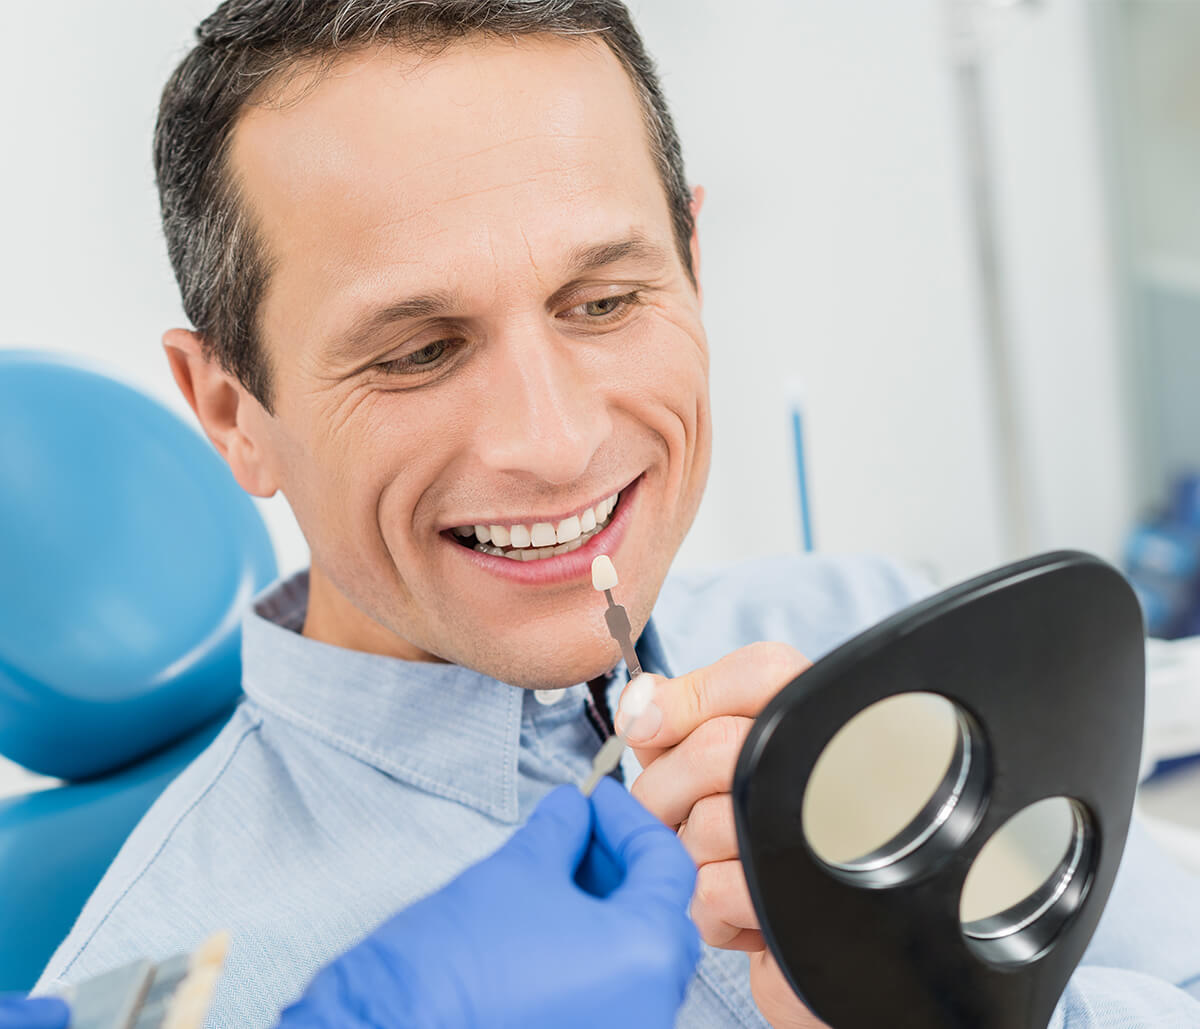 Dental implants for missing teeth are a long-lasting investment for your smile